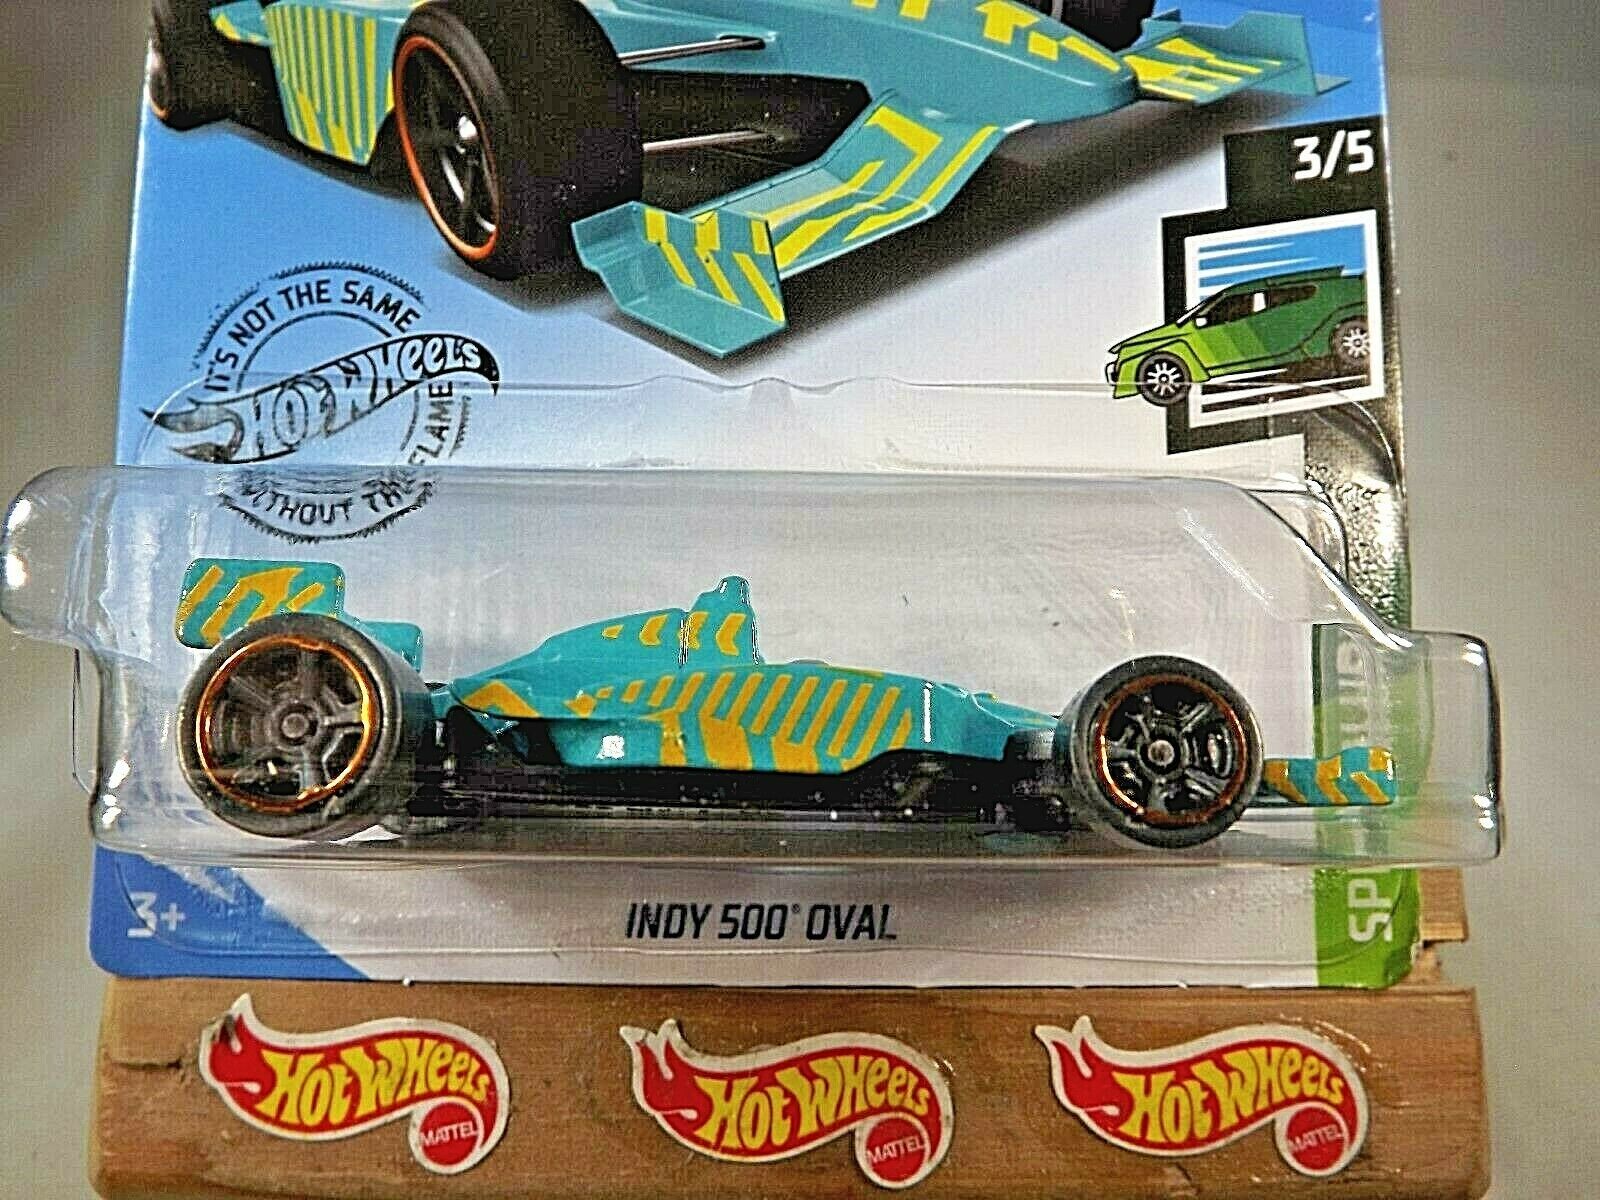 Teal Indy 500 Oval 2020 Hot Wheels Speed Blur 3/5